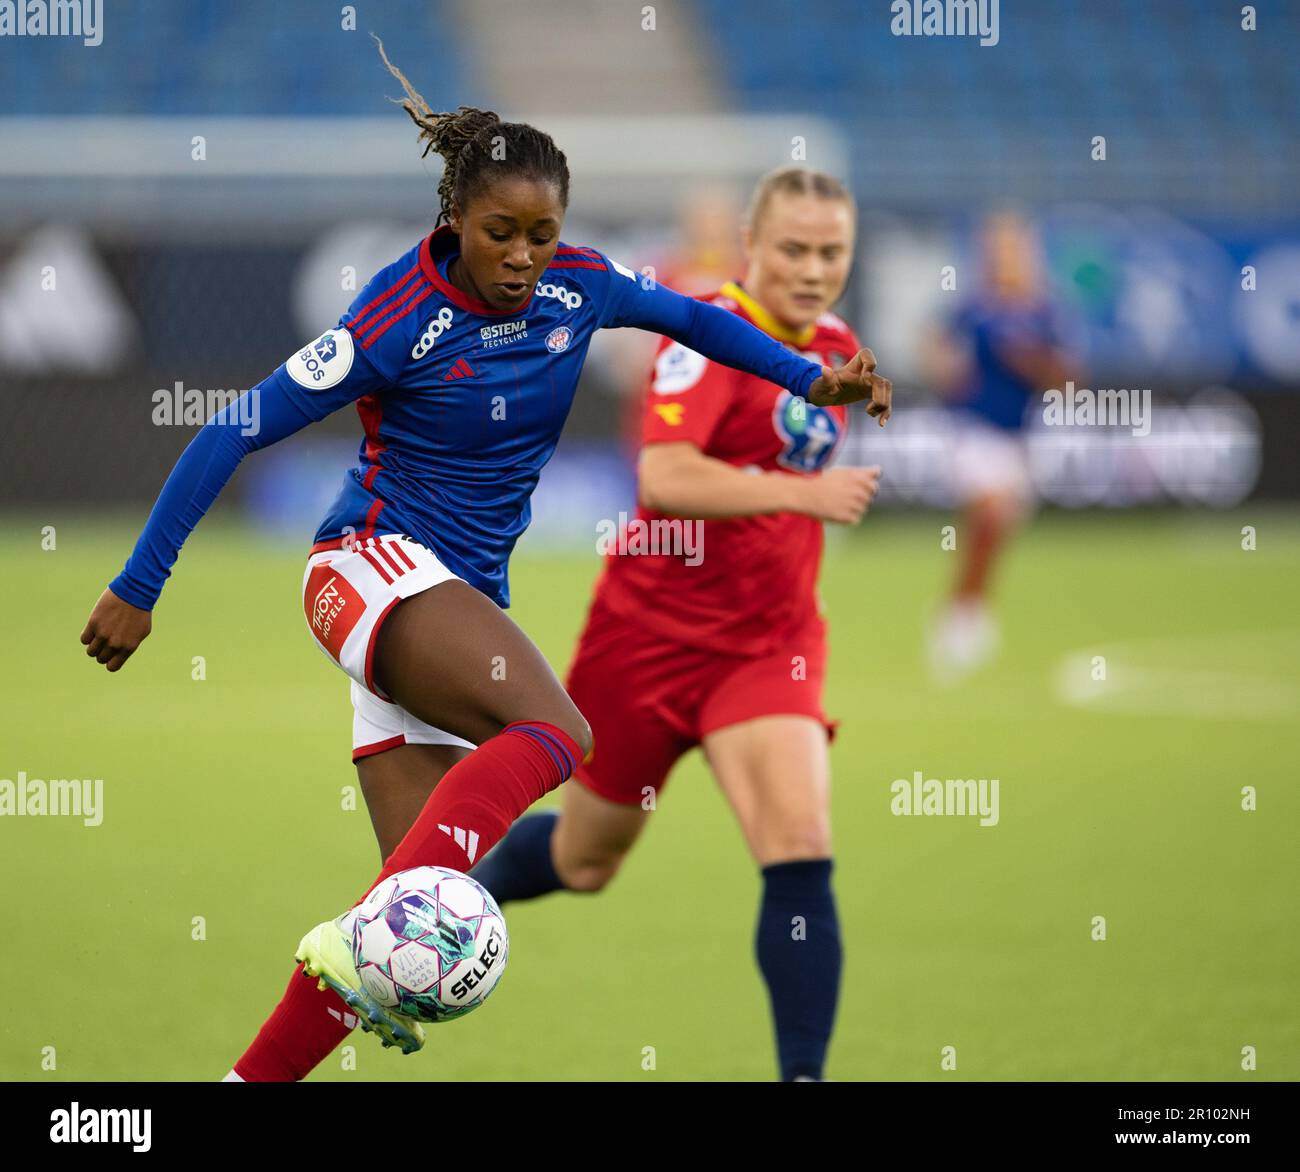 Oslo, Norway. 10th May, 2023. Oslo, Norway, May 10th 2023: Mawa Sesay (14  Valerenga) controls the ball during the Toppserien league game between  Valerenga and Roa at Intility Arena in Oslo, Norway (